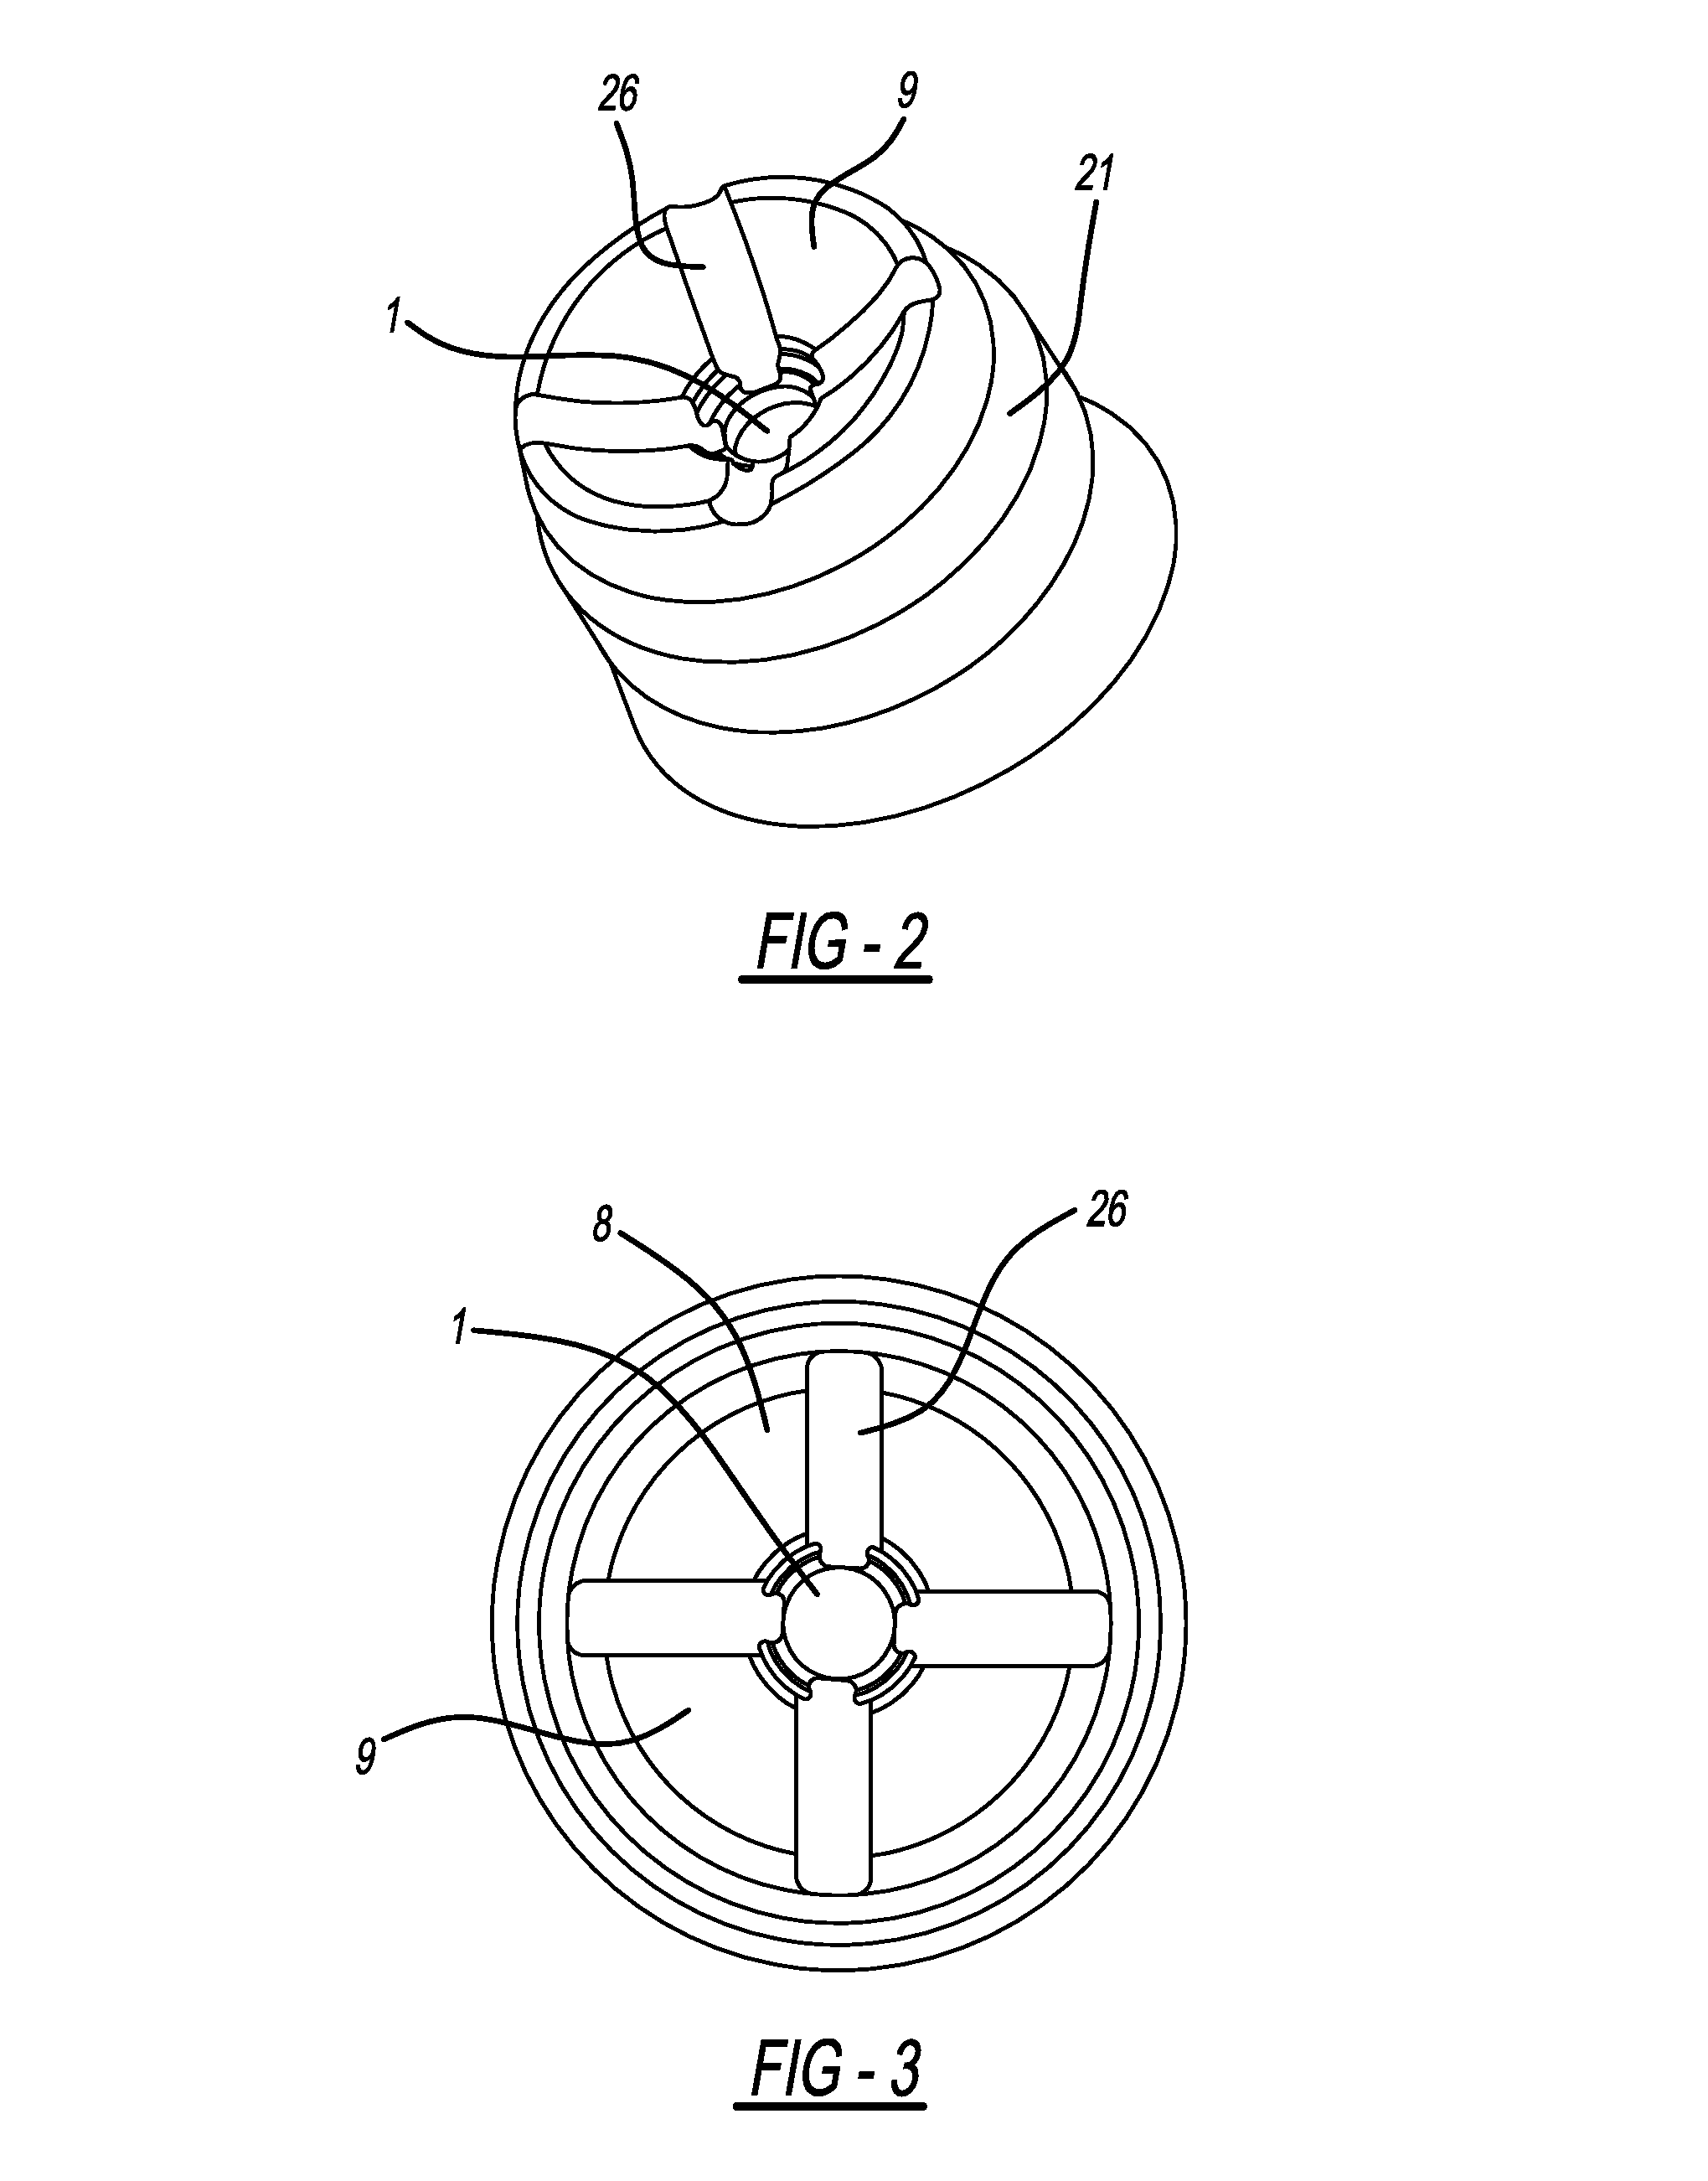 Pretensioning device for a safety belt